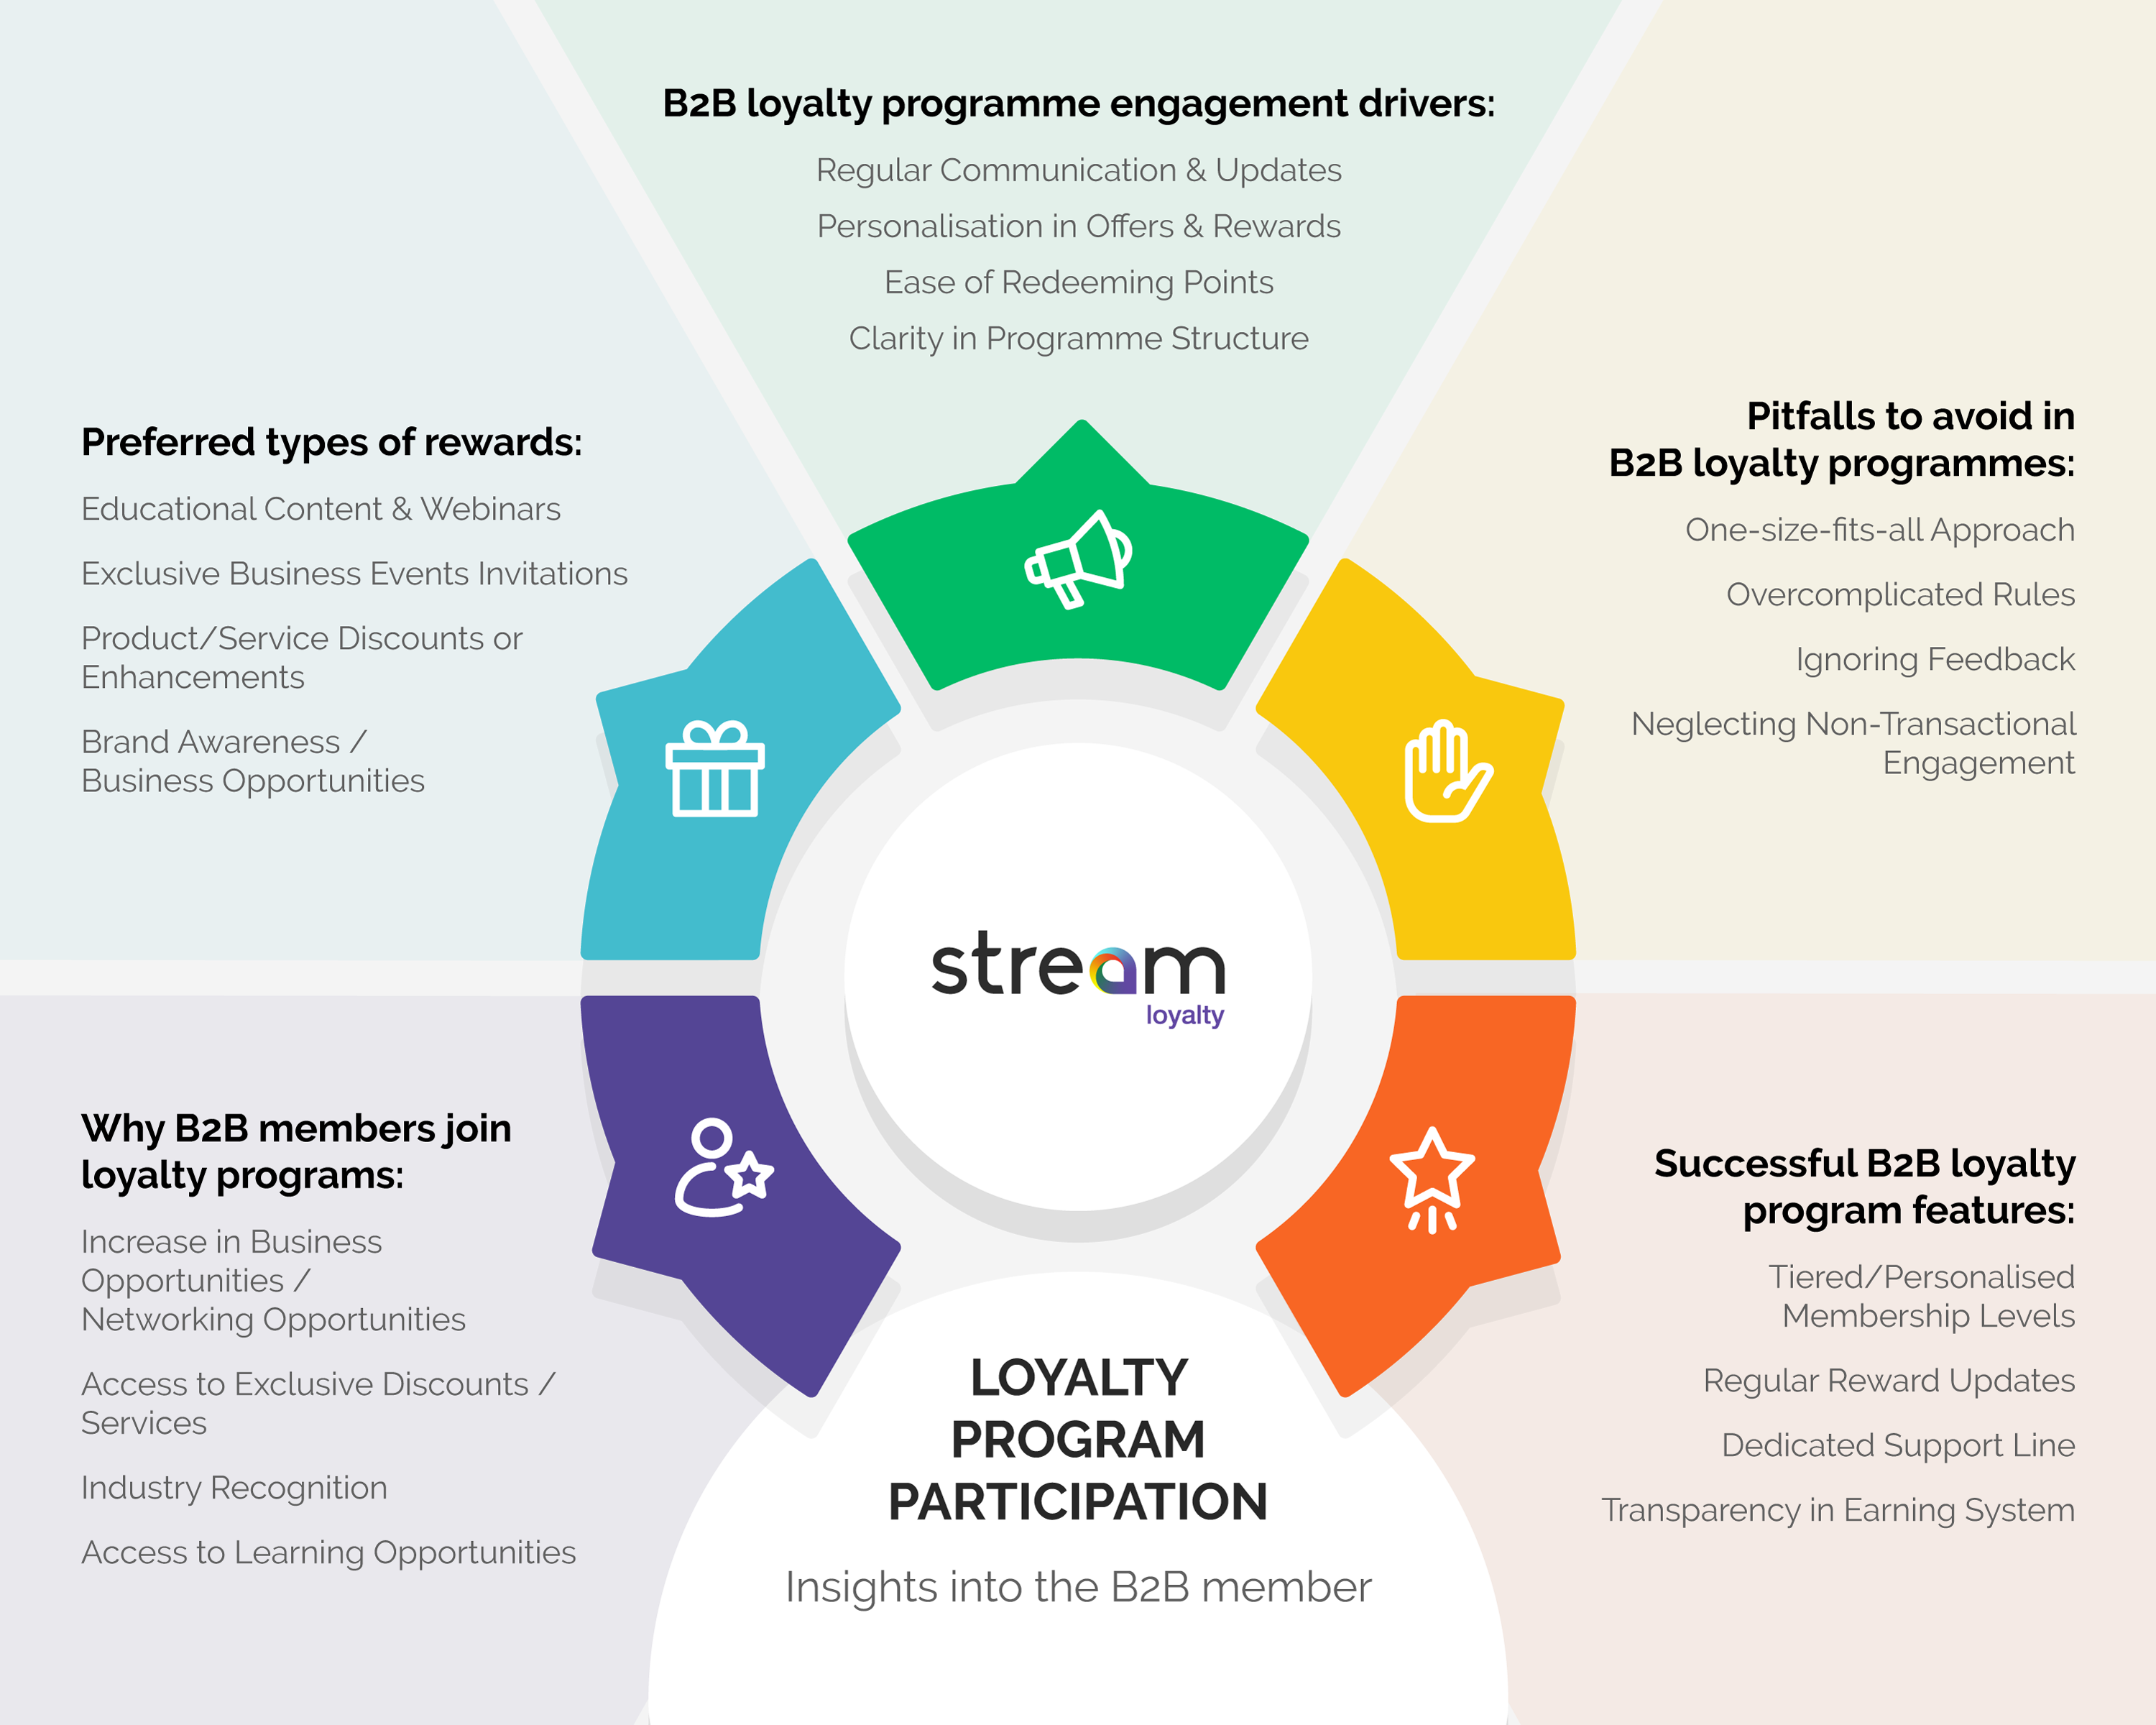 Loyalty Programme Participation Insights into the B2B member